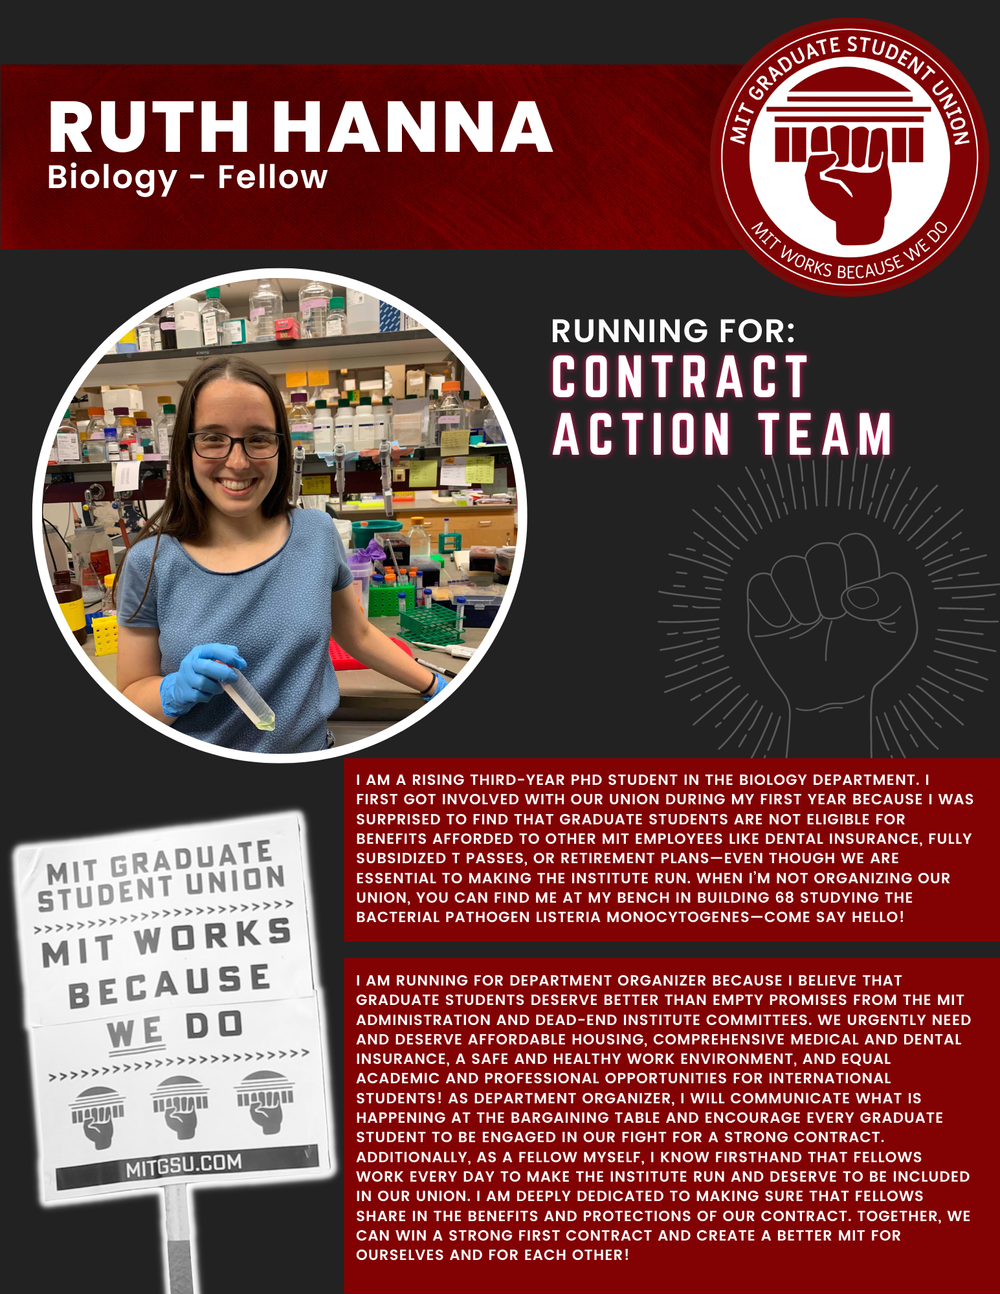  RUTH HANNA Biology - Fellow   RUNNING FOR: Contract Action Team  I AM A RISING THIRD-YEAR PHD STUDENT IN THE BIOLOGY DEPARTMENT. I FIRST GOT INVOLVED WITH OUR UNION DURING MY FIRST YEAR BECAUSE I WAS SURPRISED TO FIND THAT GRADUATE STUDENTS ARE NOT 